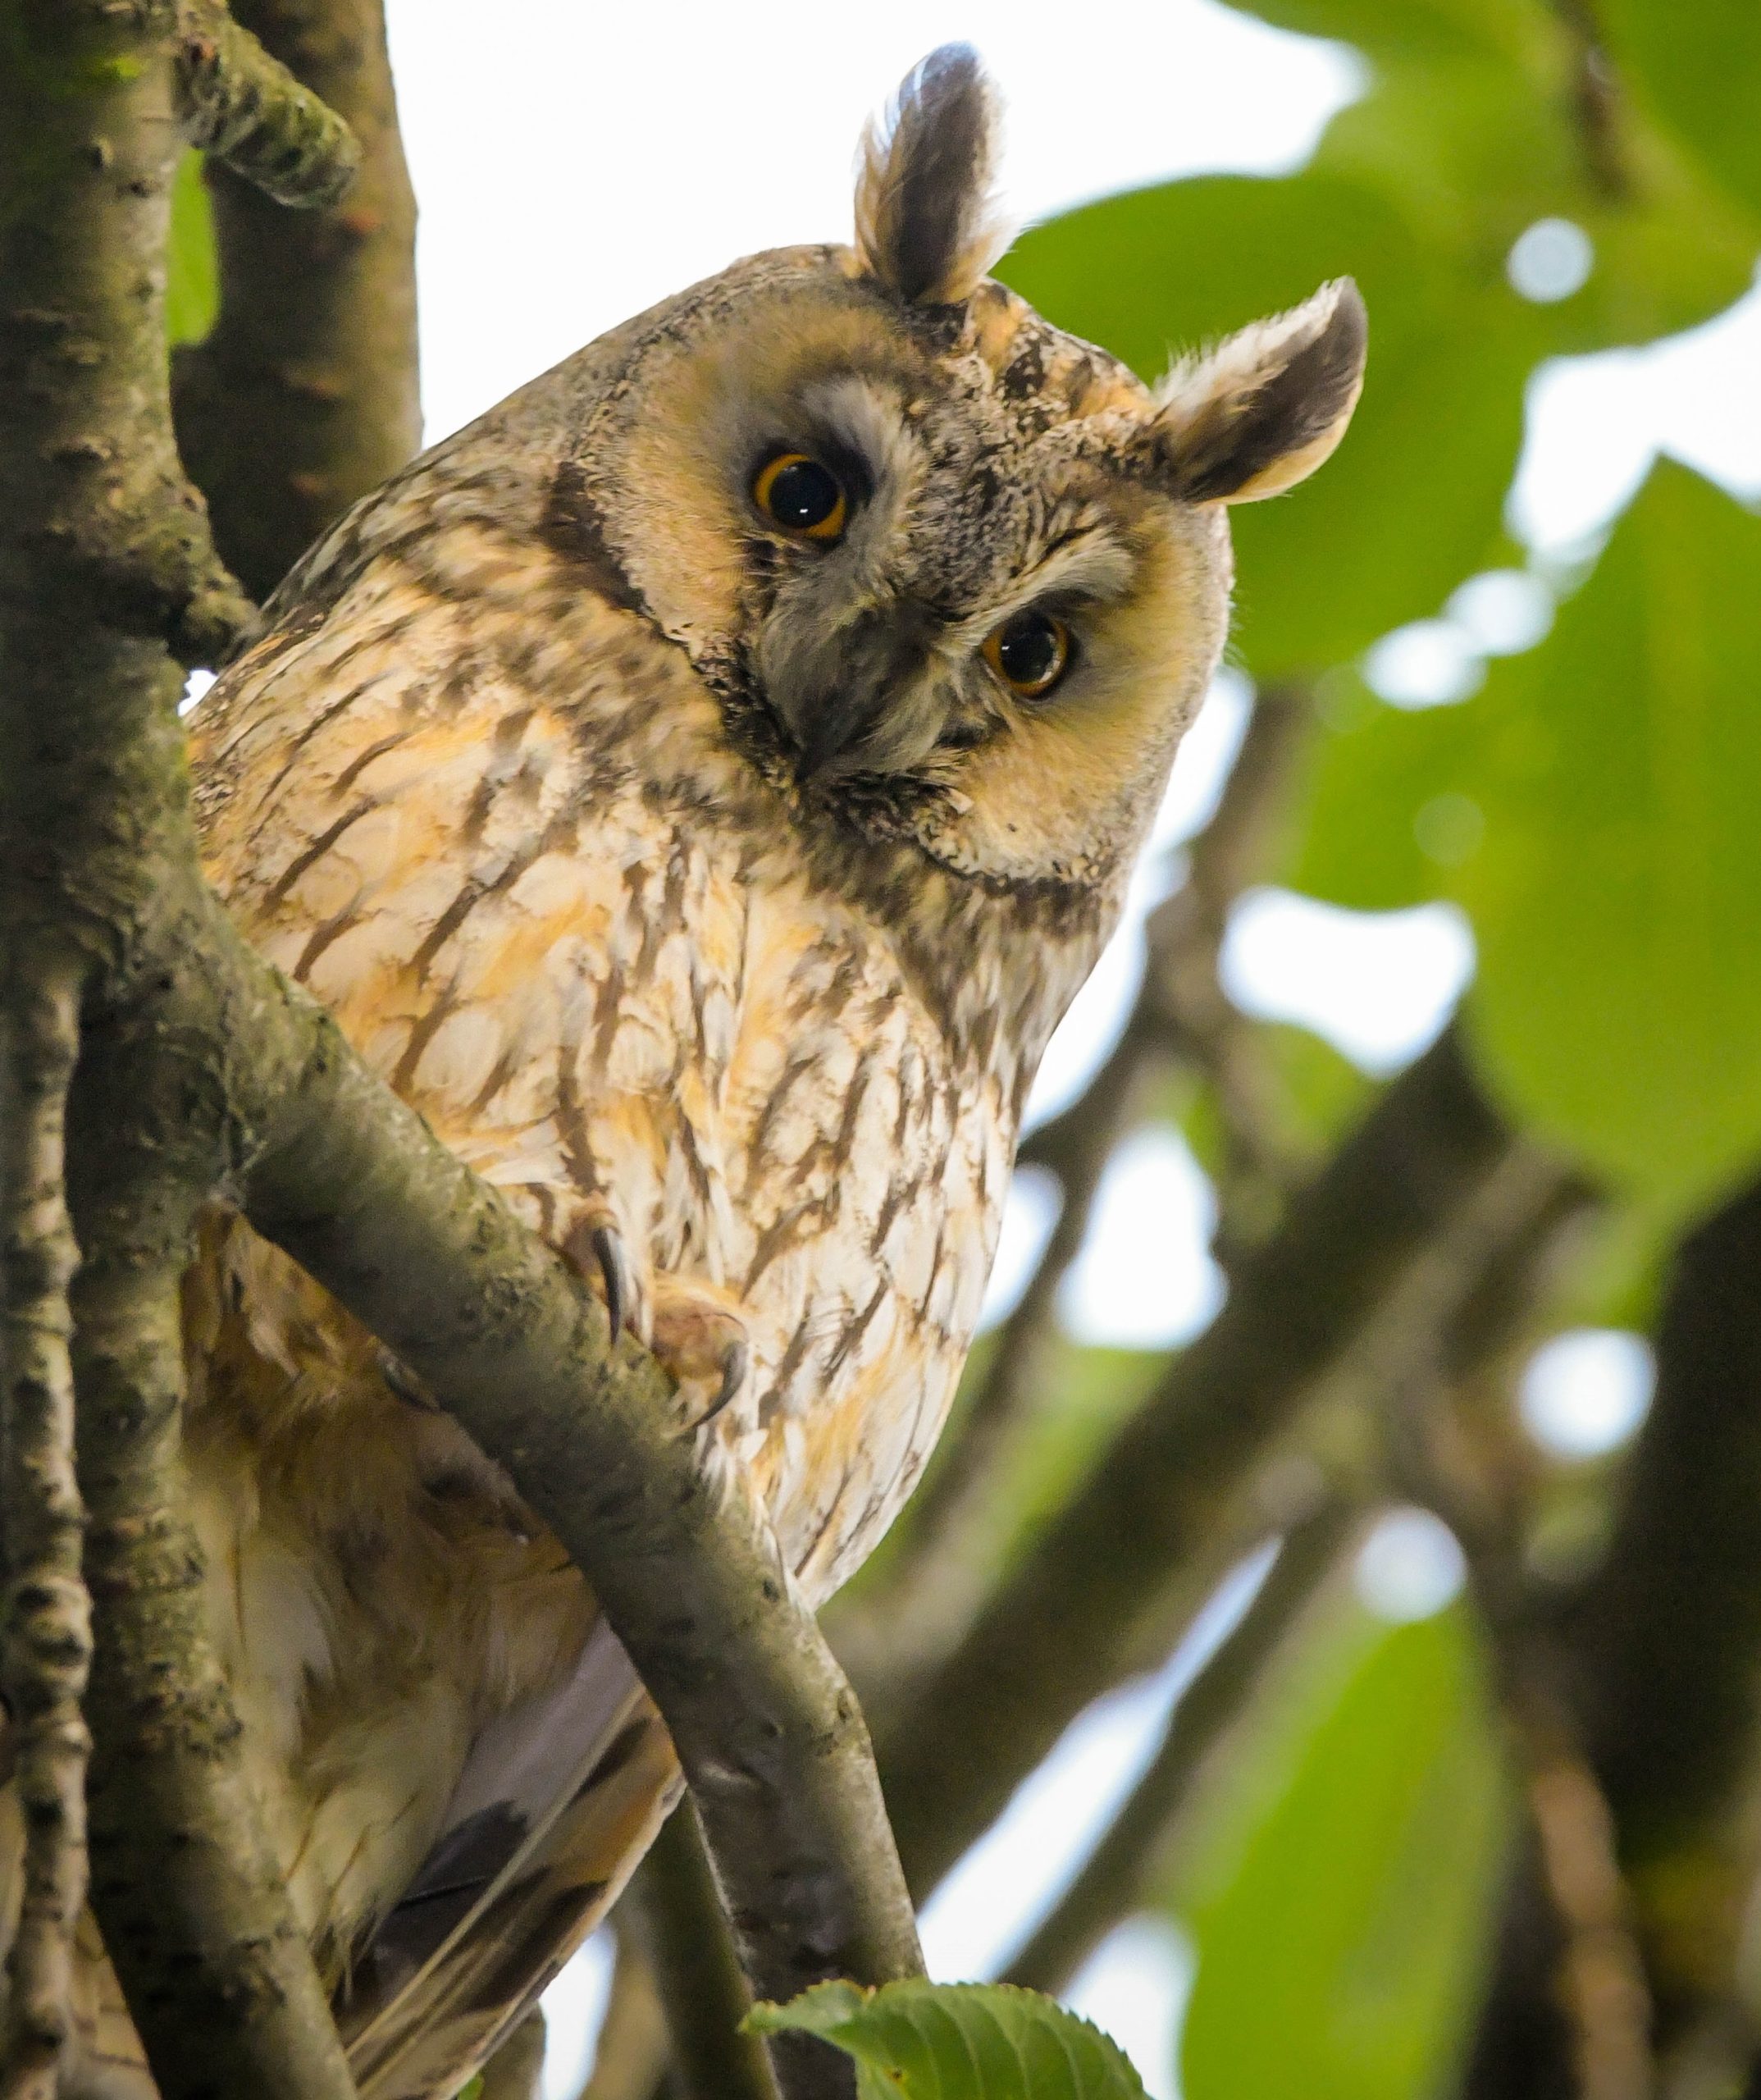 wildlife convention: Long-eared owl in tree